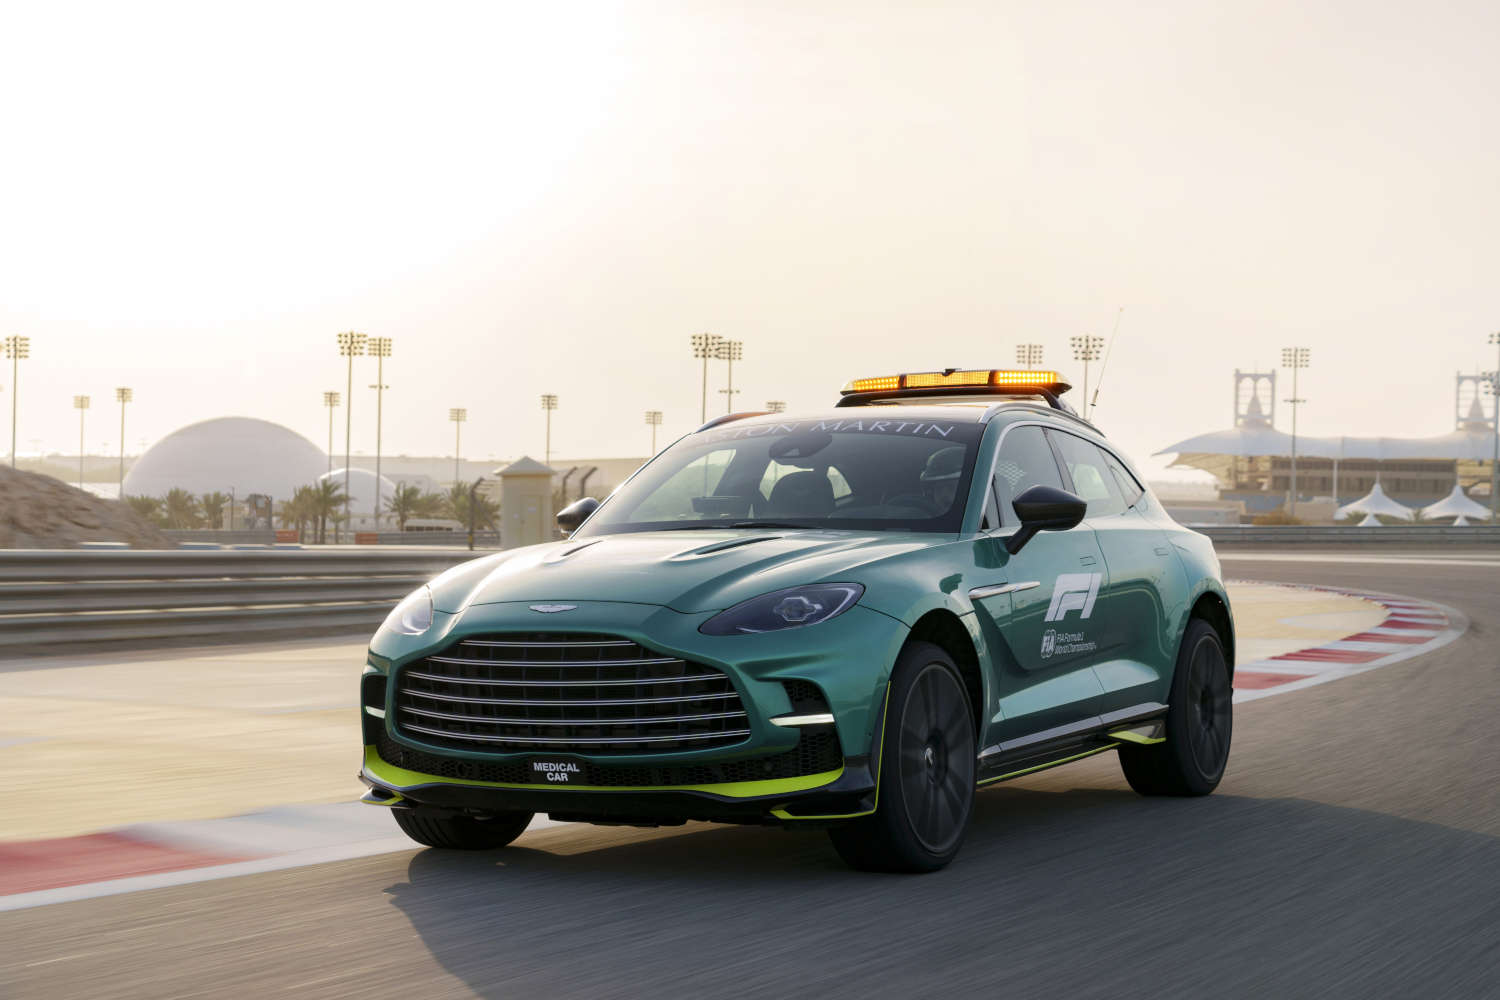 This Aston Martin DBX707 SUV is the Formula 1 medical car for 2023